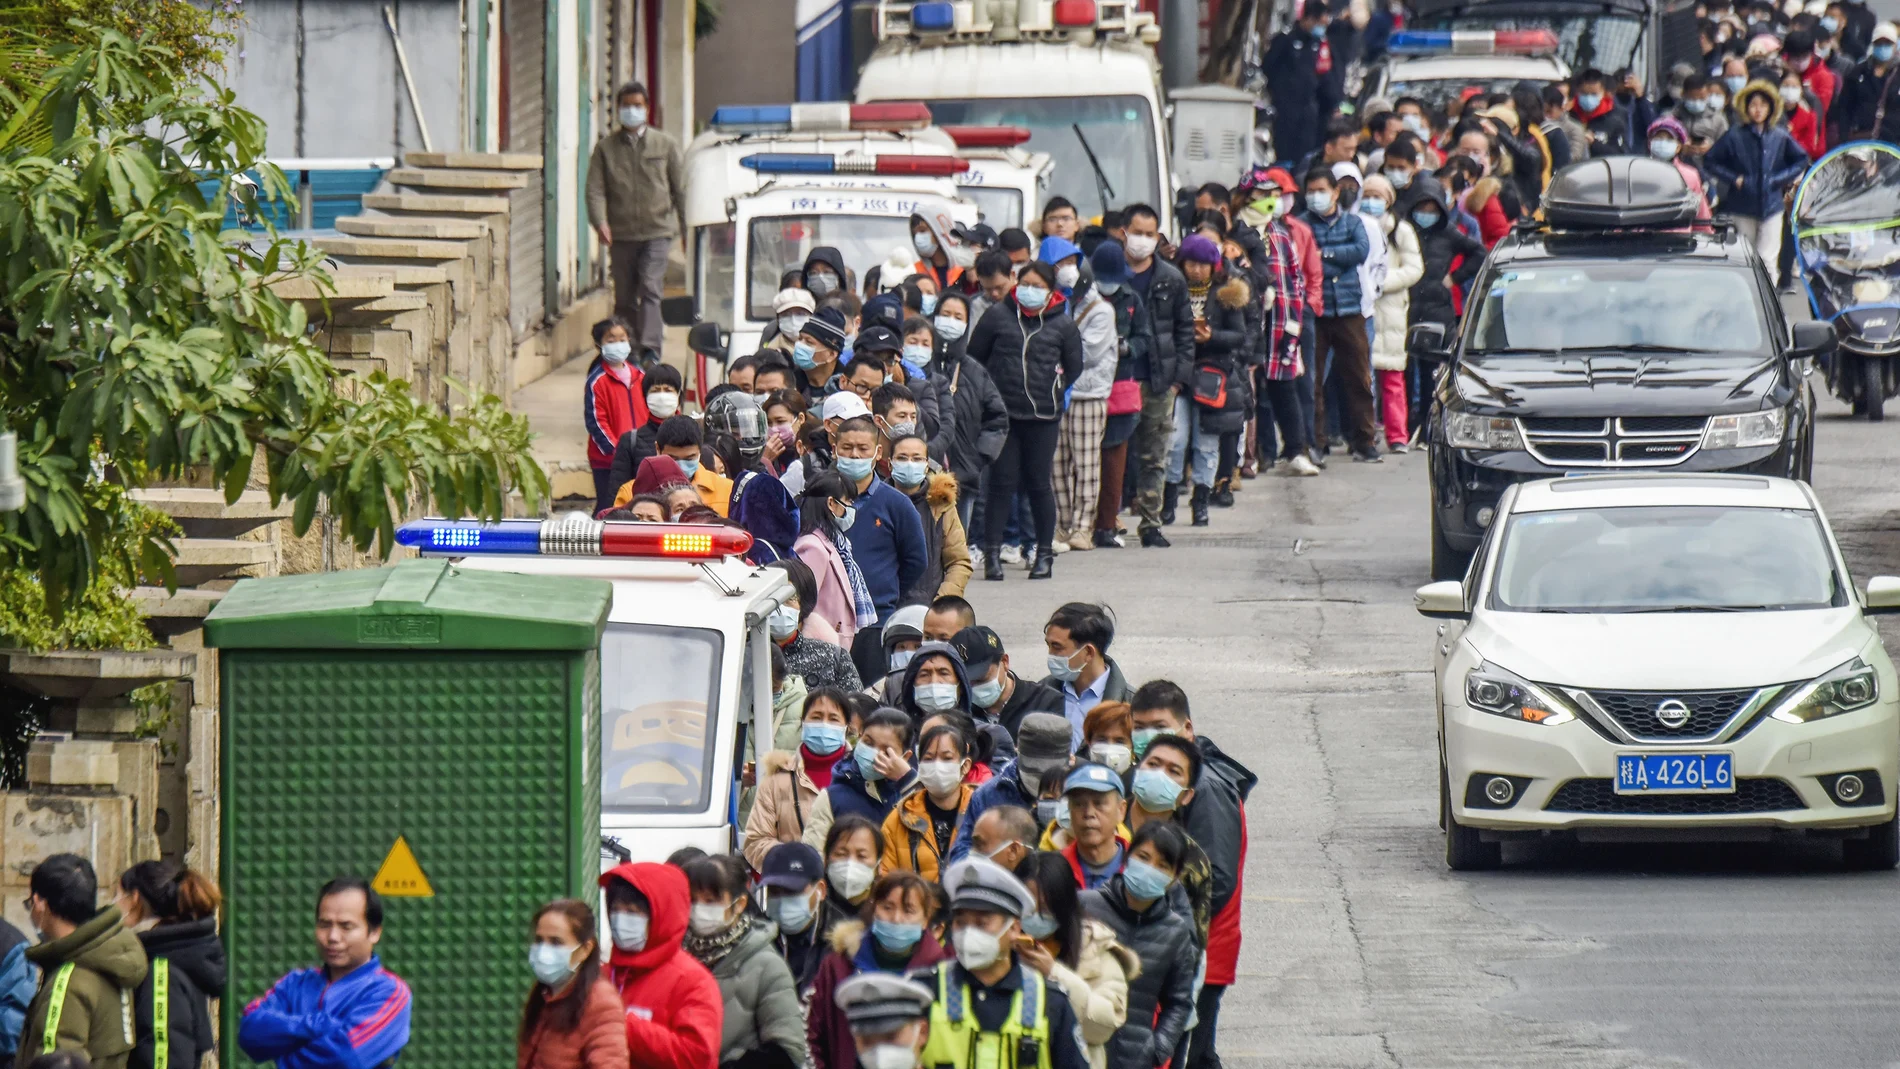 People line up to buy face masks from a medical supply company in Nanning in southern China's Guangxi Zhuang Autonomous Region, Wednesday, Jan. 29, 2020. Countries began evacuating their citizens Wednesday from the Chinese city hardest-hit by a new virus that has now infected more people in China than were sickened in the country by SARS. (Chinatopix via AP)